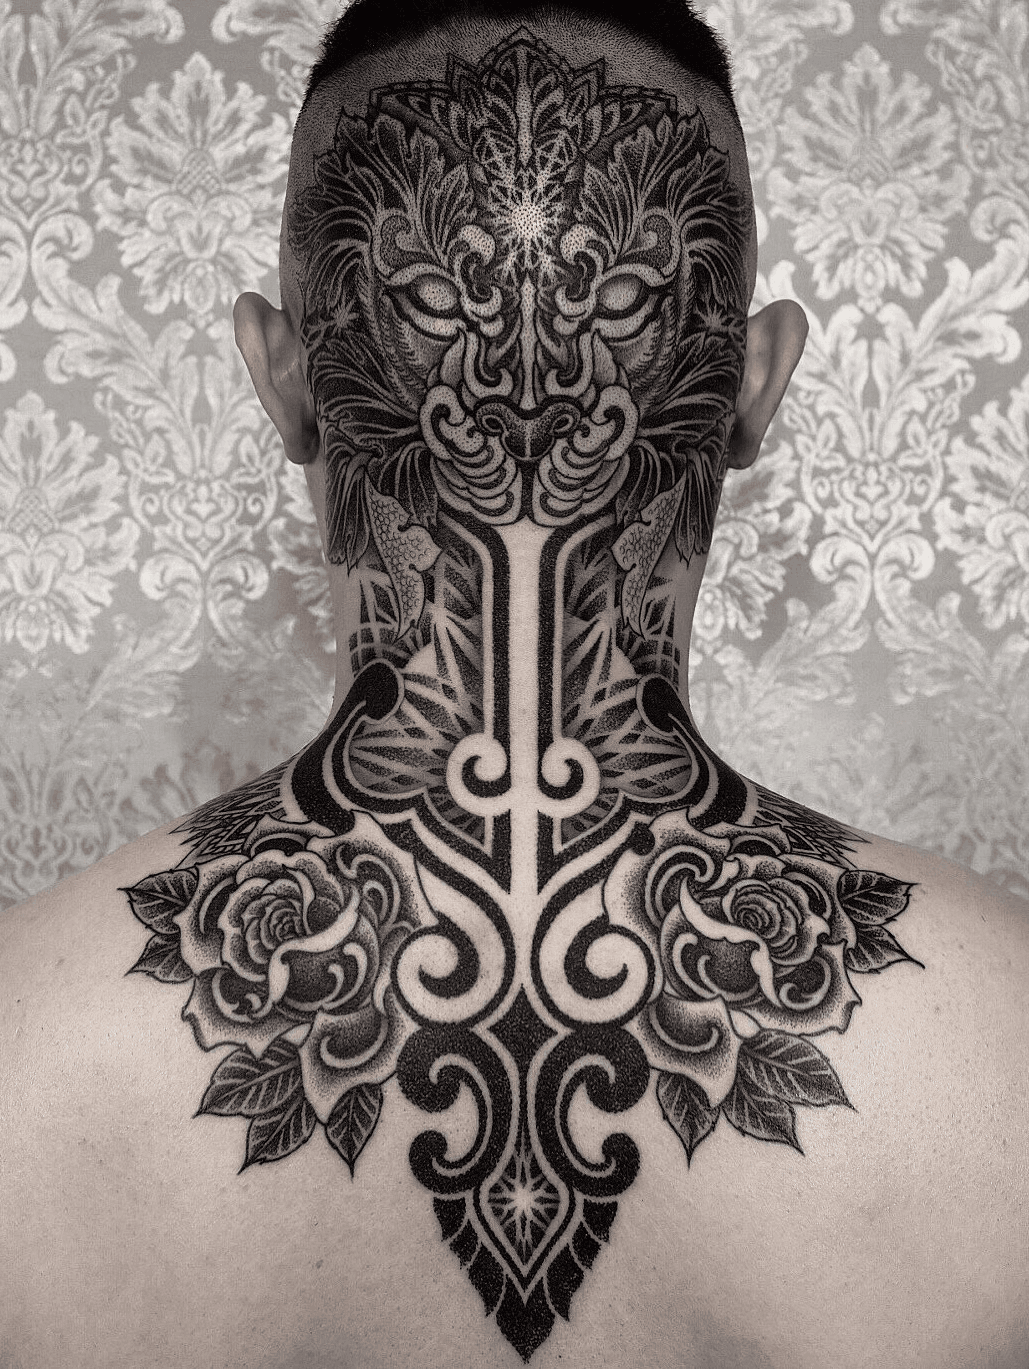 Tattoo Uploaded By Arang Eleven Geometric Lion And Roses On Back Head To Shoulders Tattoodo